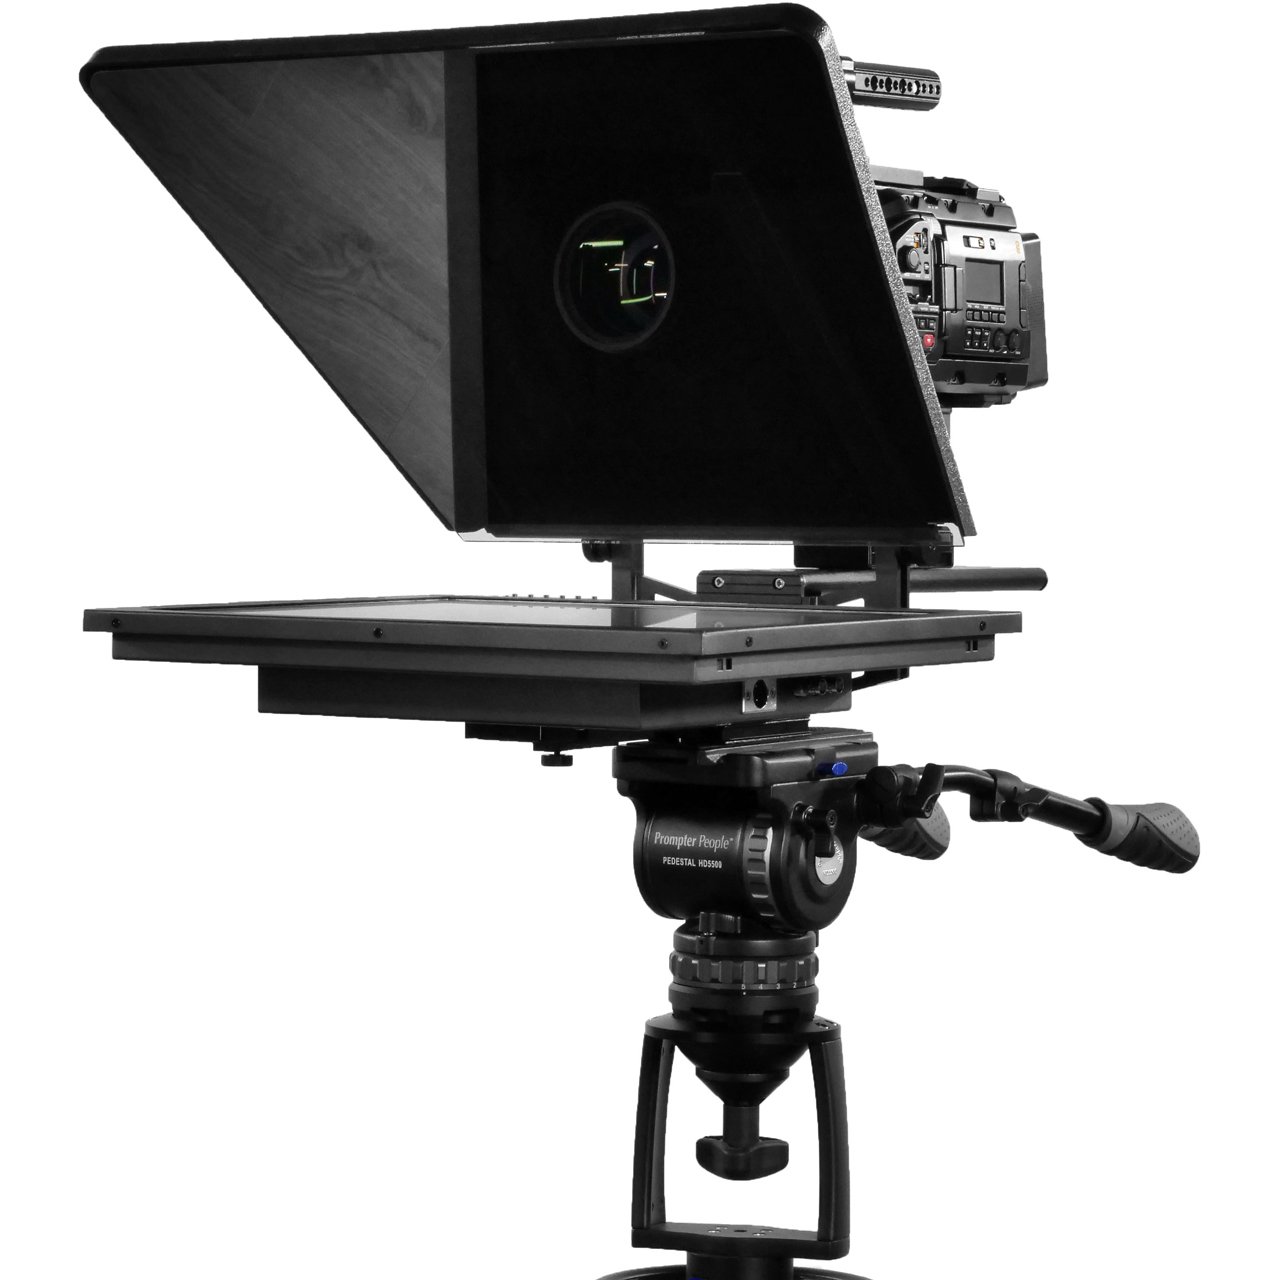 Prompter People PROP-S19HB 19in Trapezoidal Glass Reversing High Bright Teleprompter Monitor SDI / HDMI / VGA / Comp Inputs PRP-PROP-S19HB